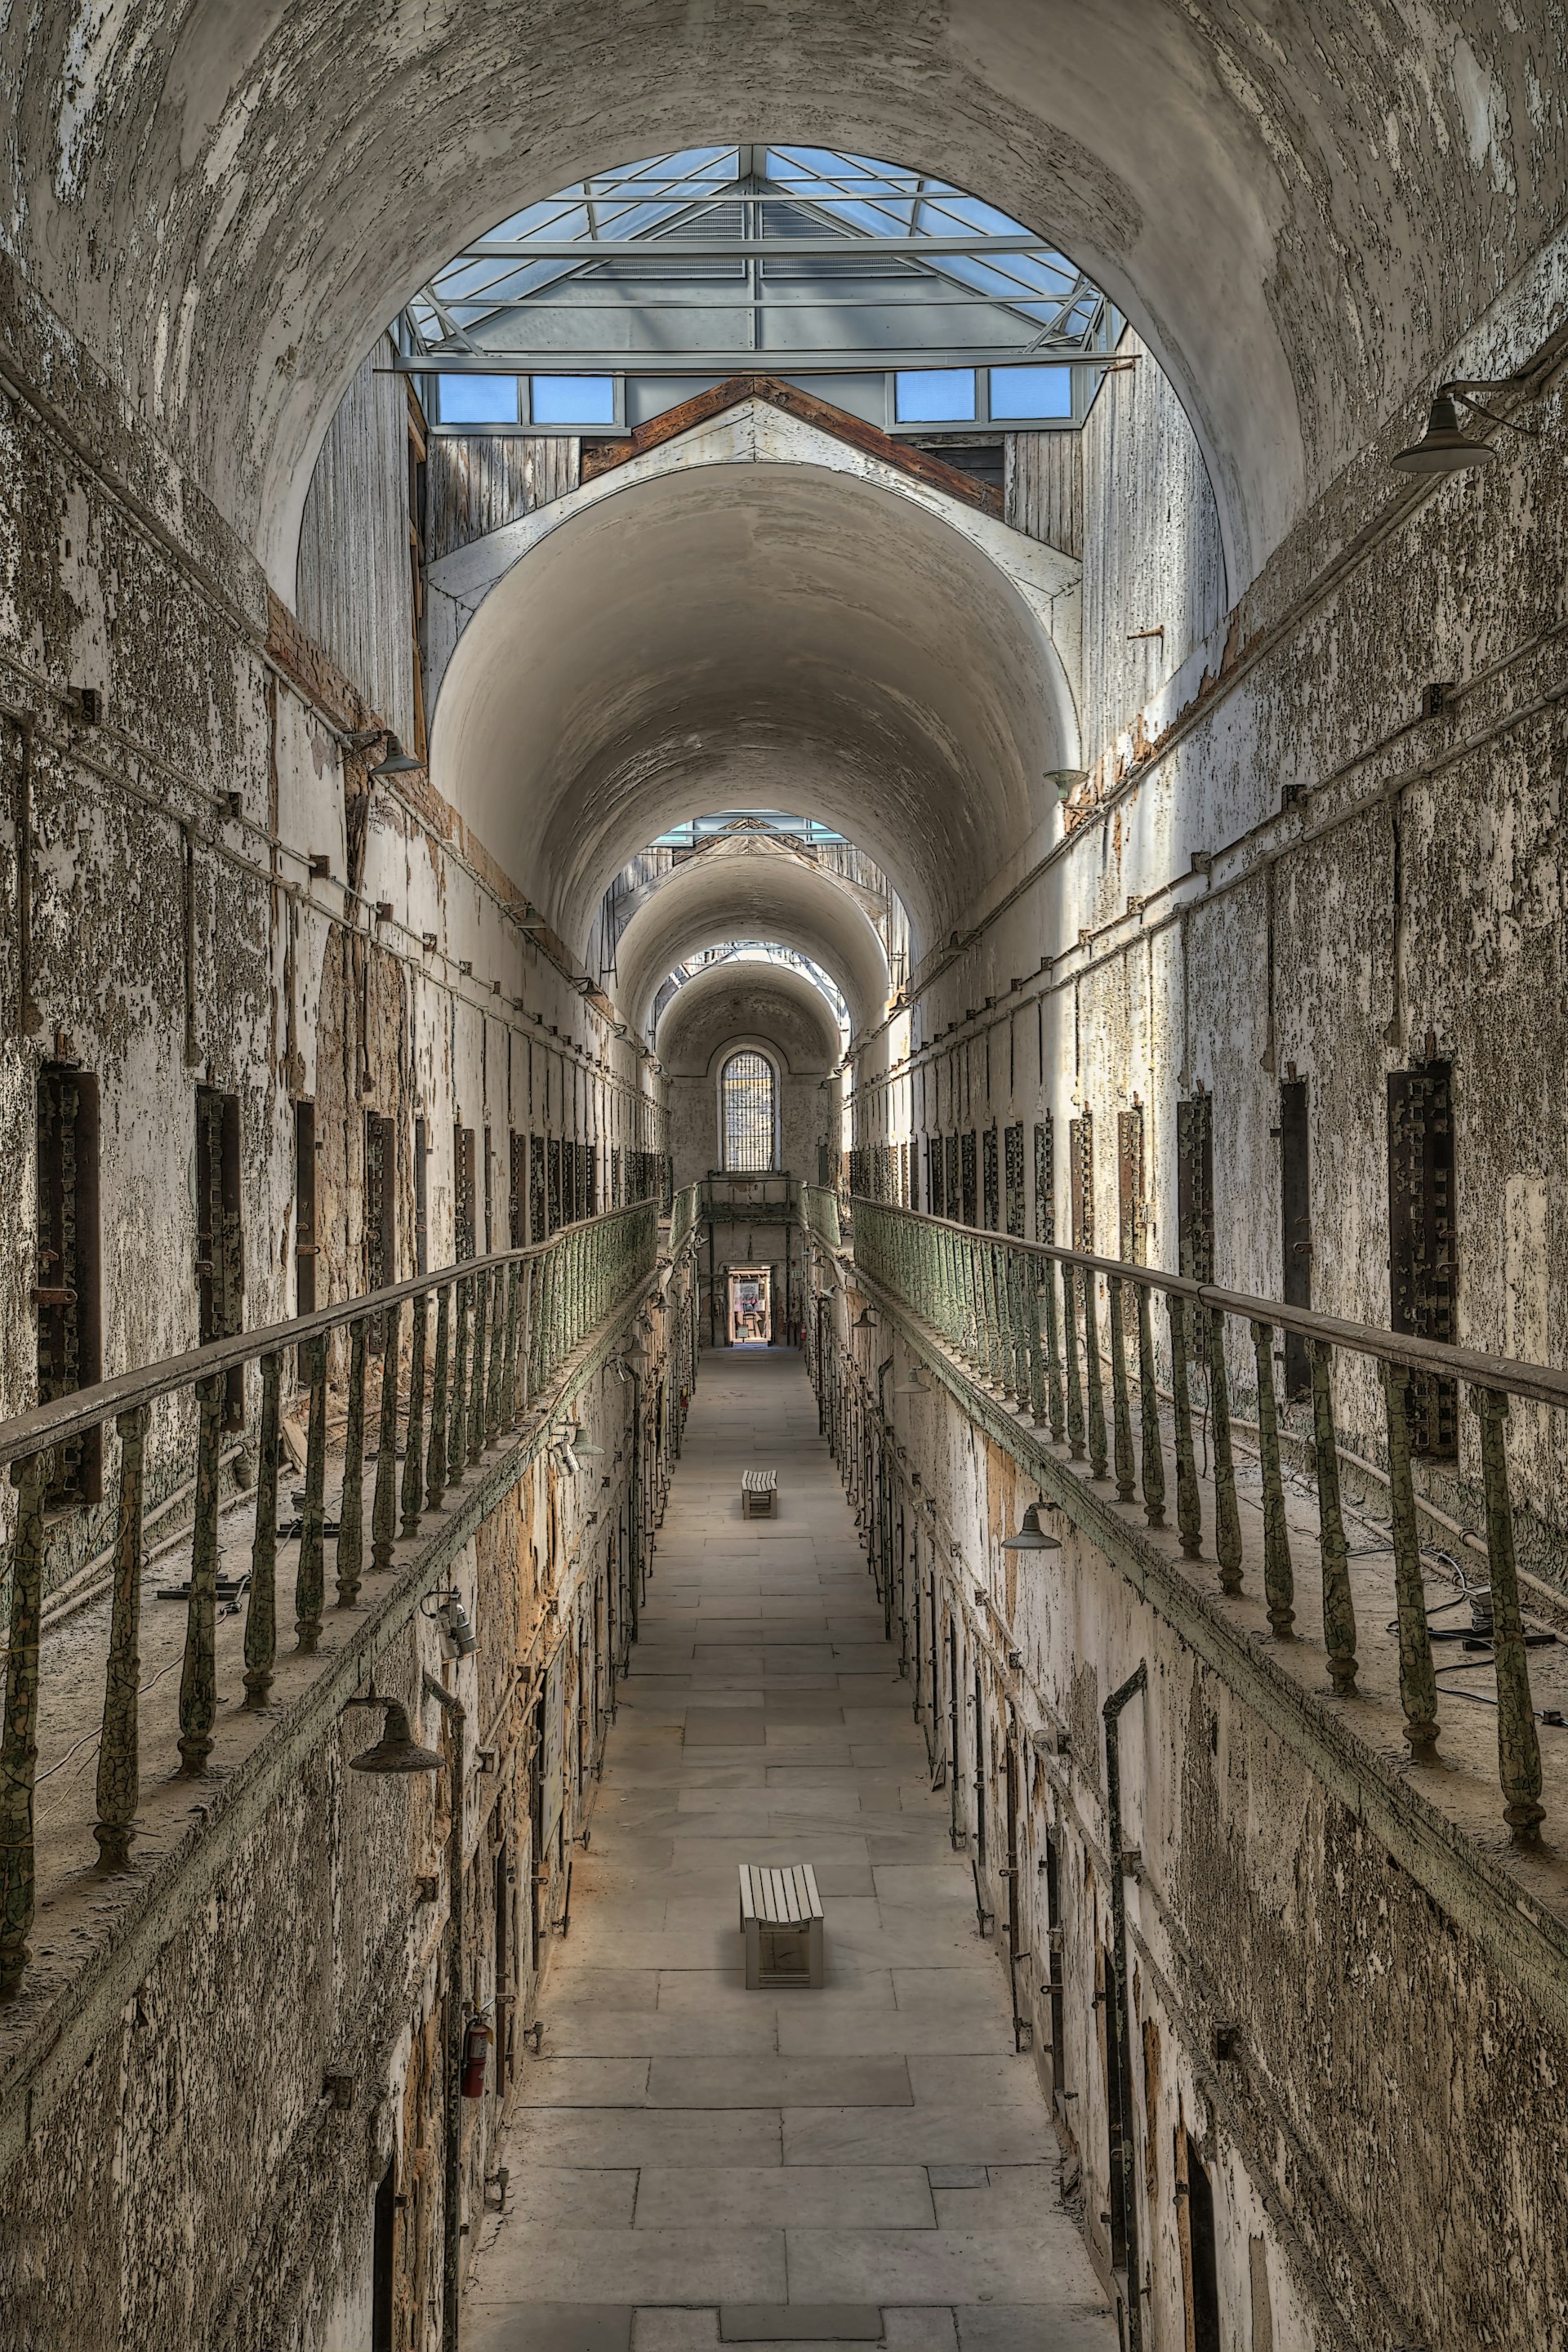 Abandoned jail cell block with a skylight at the Eastern State Penitentiary in Philadelphia